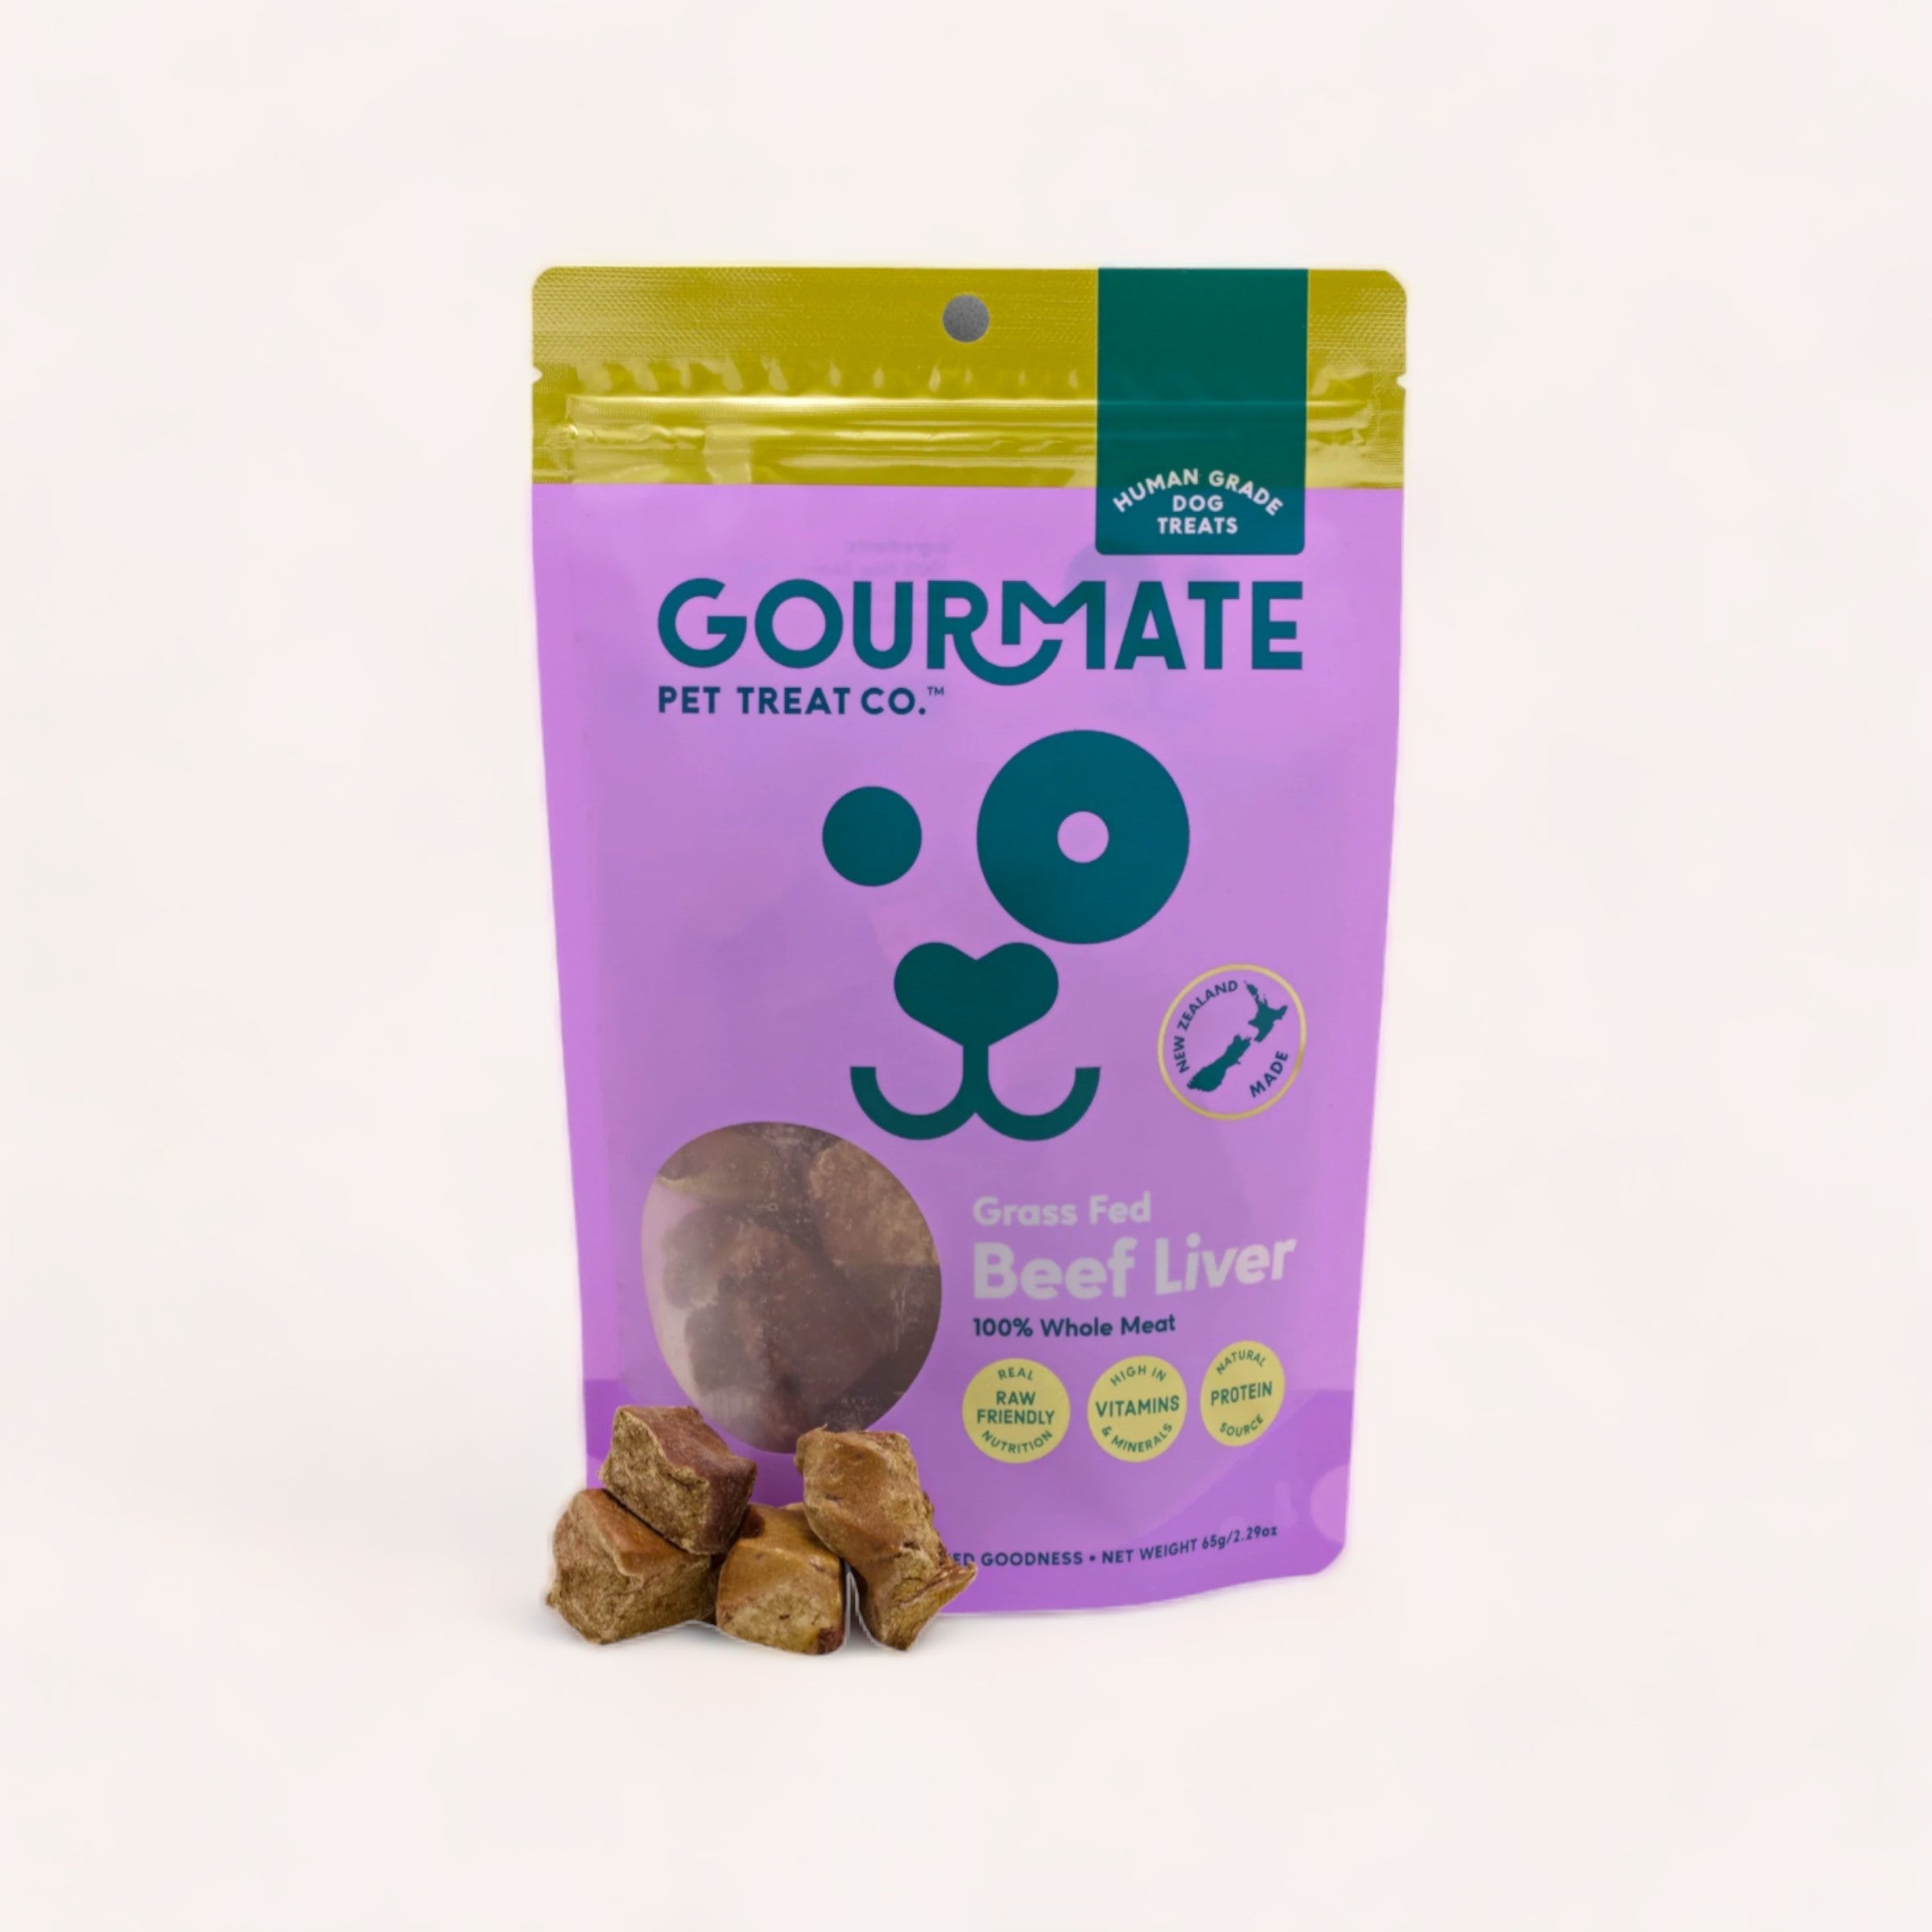 A package of Gourmate Pet Treat Co. Beef Liver Treats displayed in front of a white background, with several treats placed outside the package.